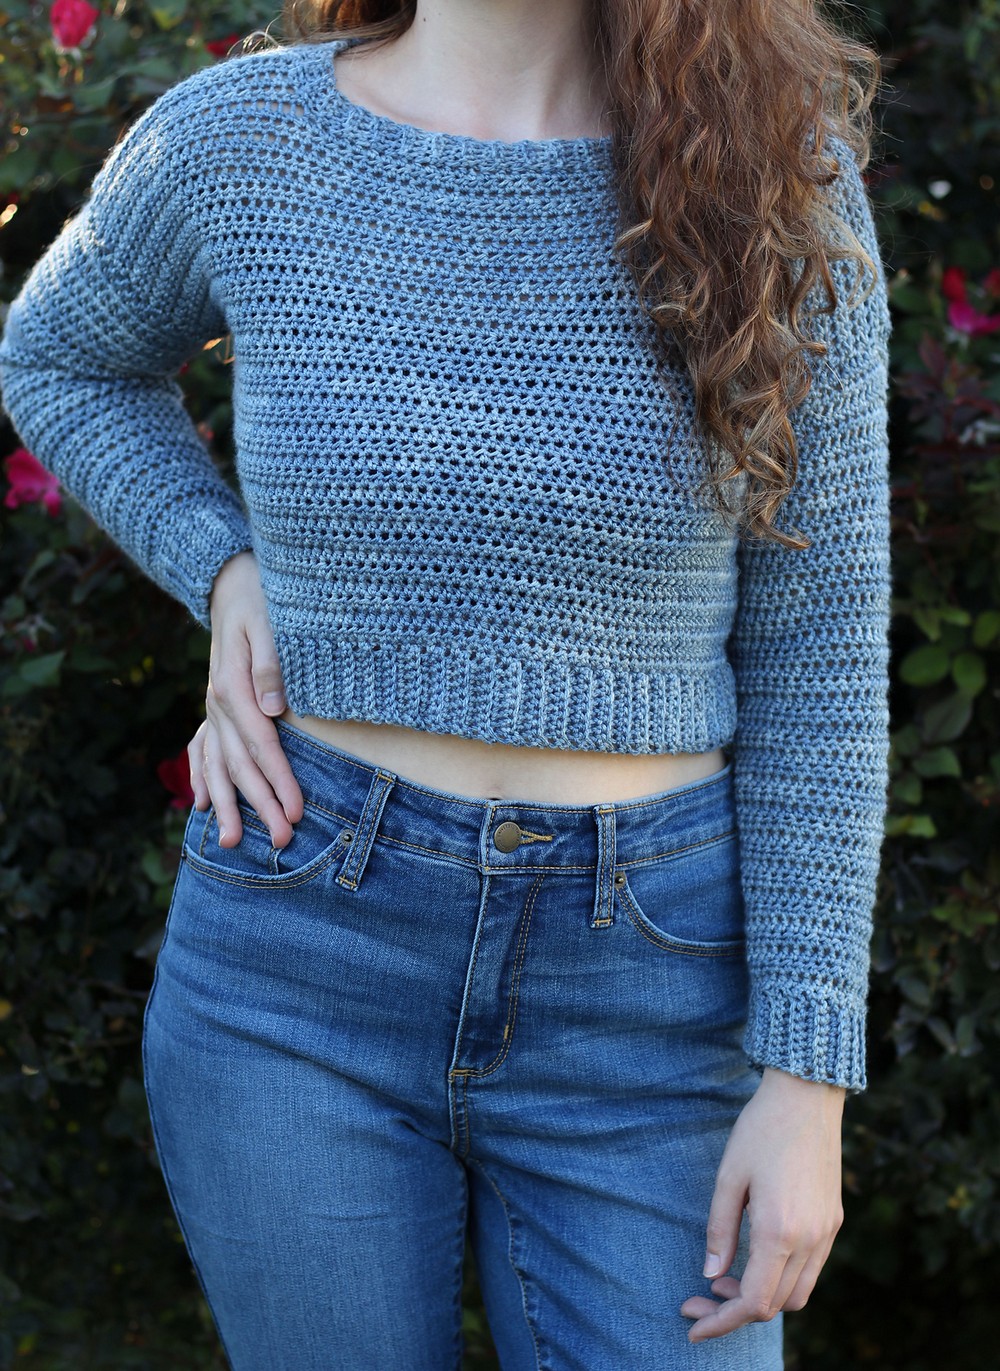 Pattern for a short crochet sweater made from acacia wood